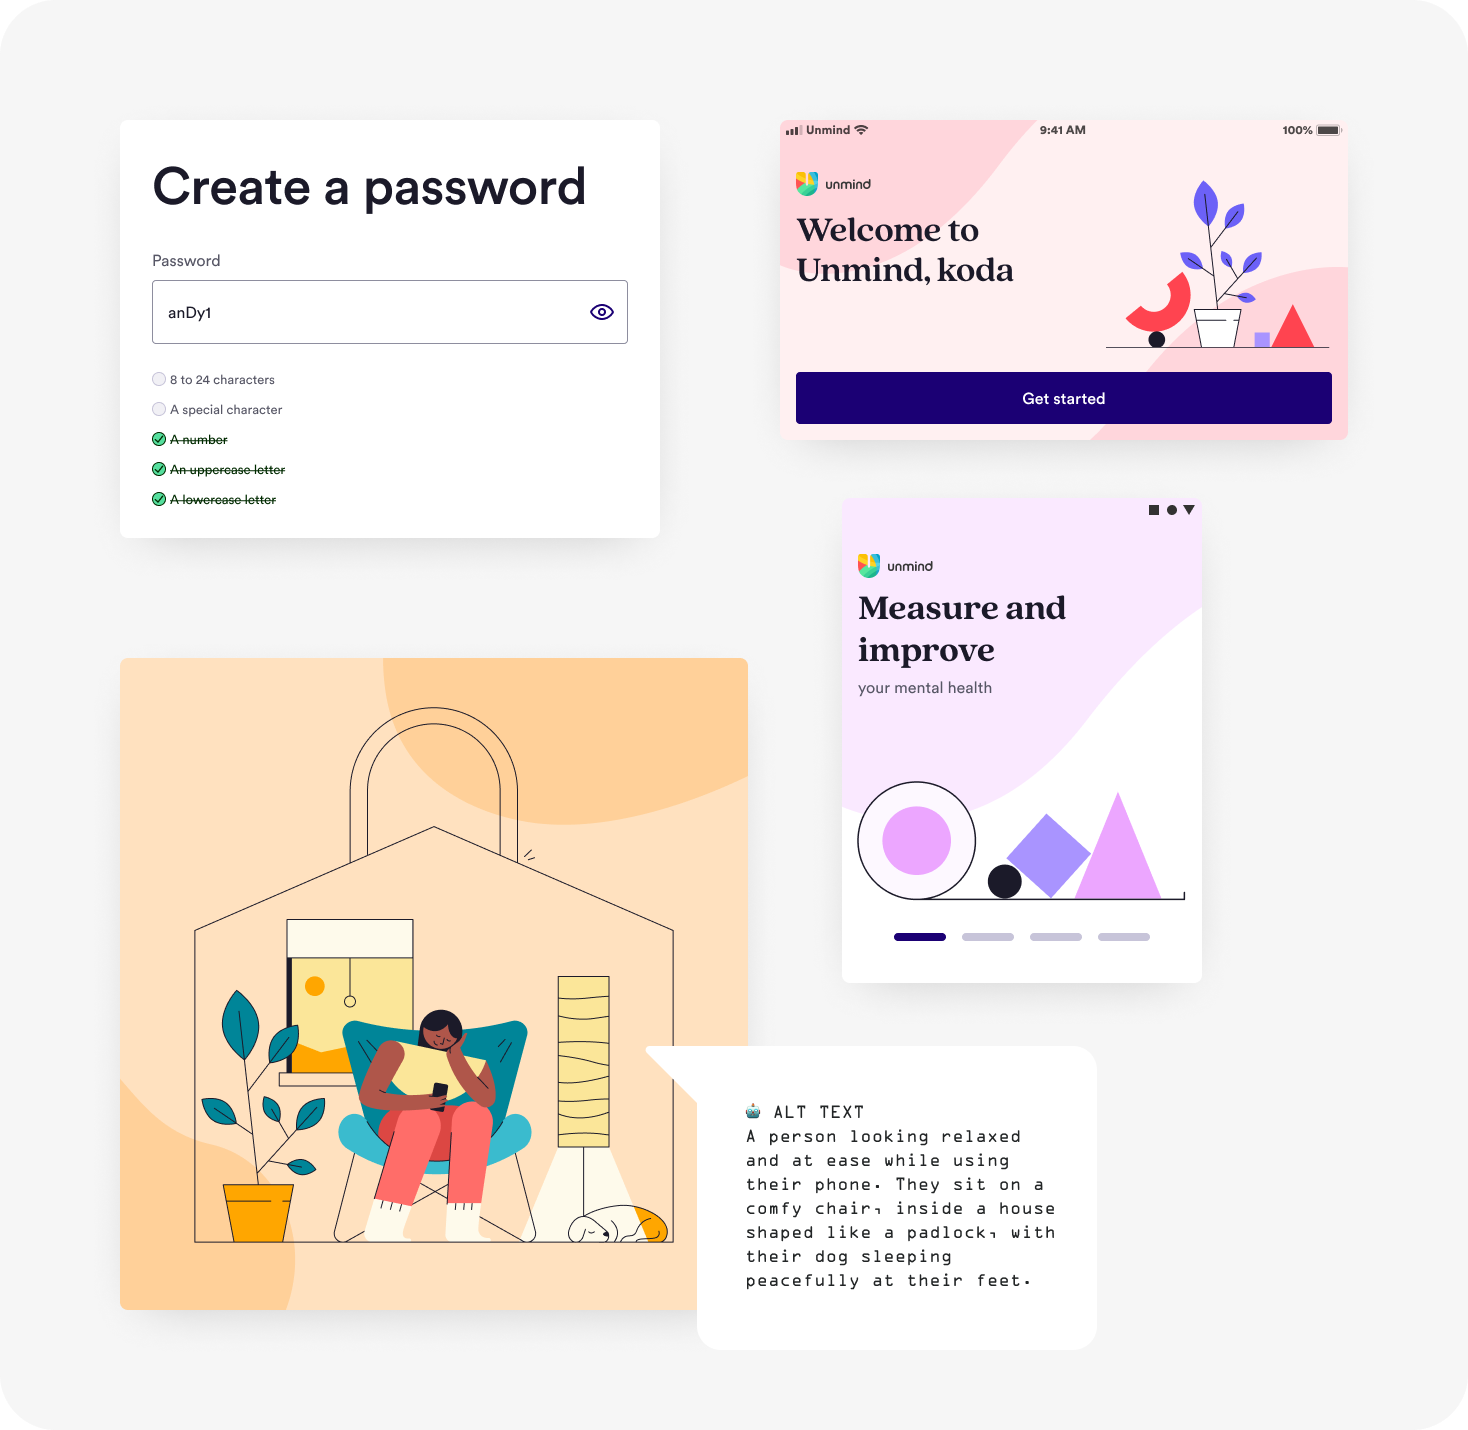 A montage of four accessibility improvements. 1. 'Create password' field now shows each password rule, and marks them as completed when done — this is done both visually and for access devices. 2. Landscape orientation is available for all platforms and devices. 3. Illustrations have alt-text that describe what is happening and and emotional context as visuals try to convey. 4. Swiping through a native devices introduction carousels can now be done in a variety of ways for people of differing abilities and access needs.